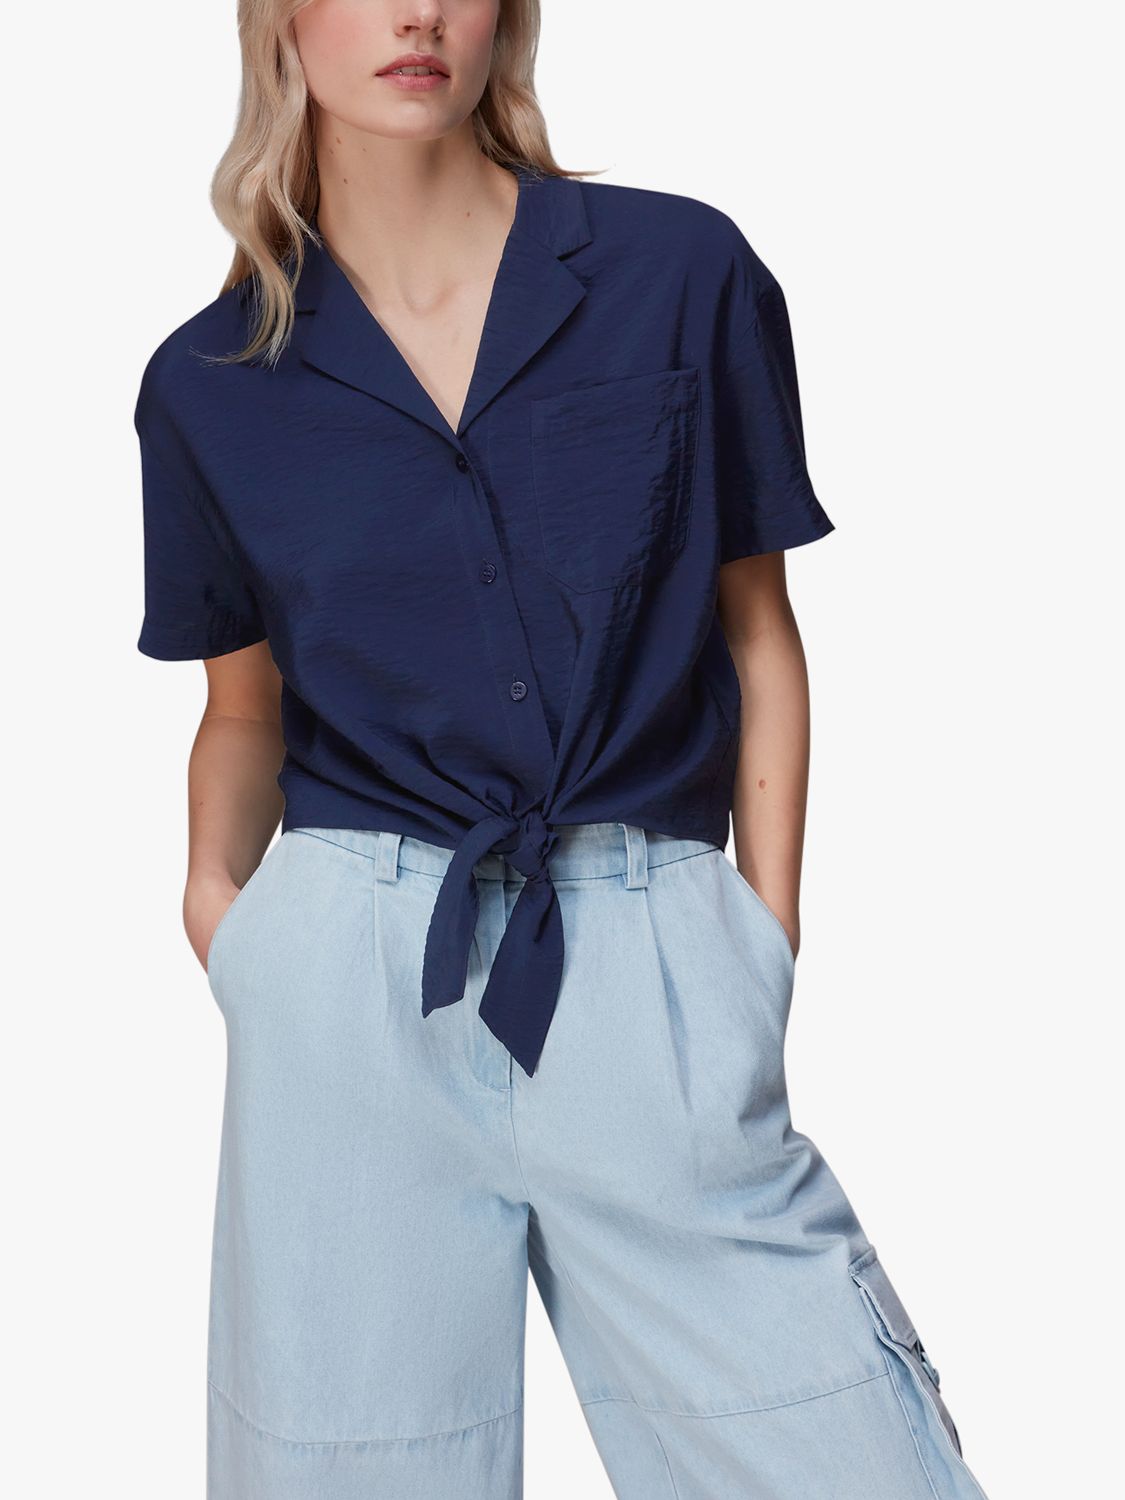 Buy Whistles Nicola Tie Front Blouse, Navy Online at johnlewis.com